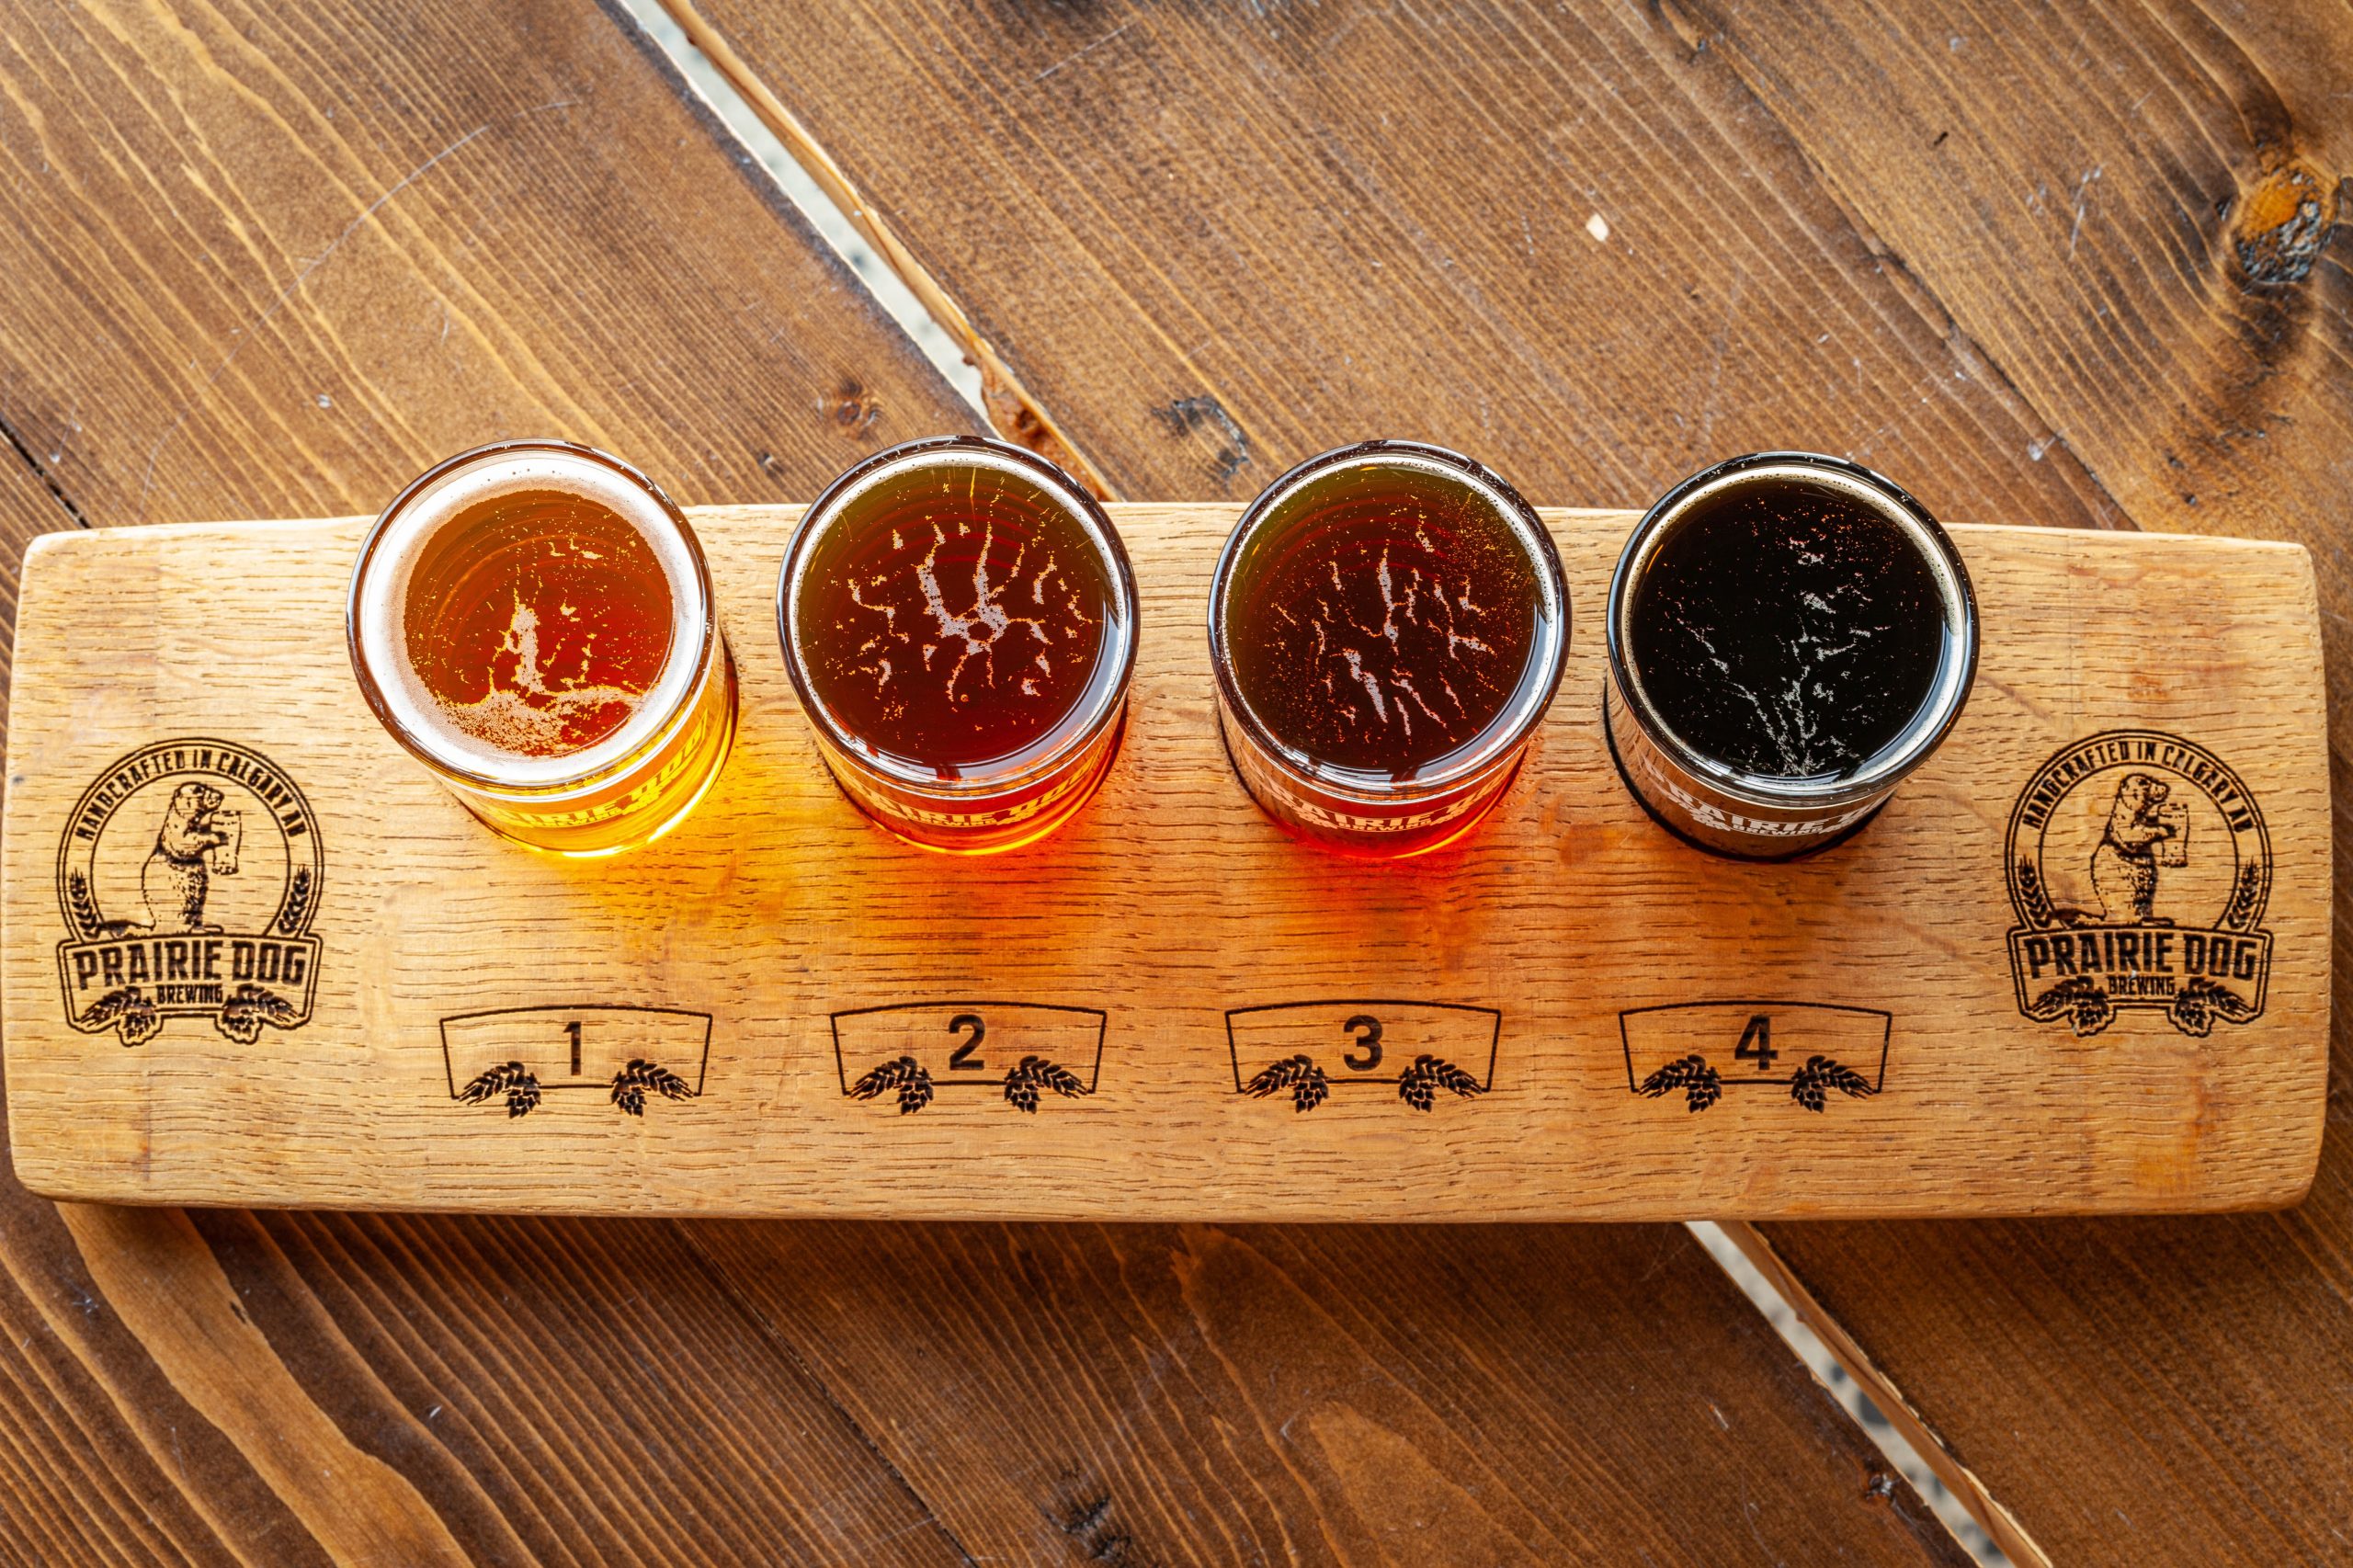 A Prairie Dog branded oak stave flight paddle with four different beers